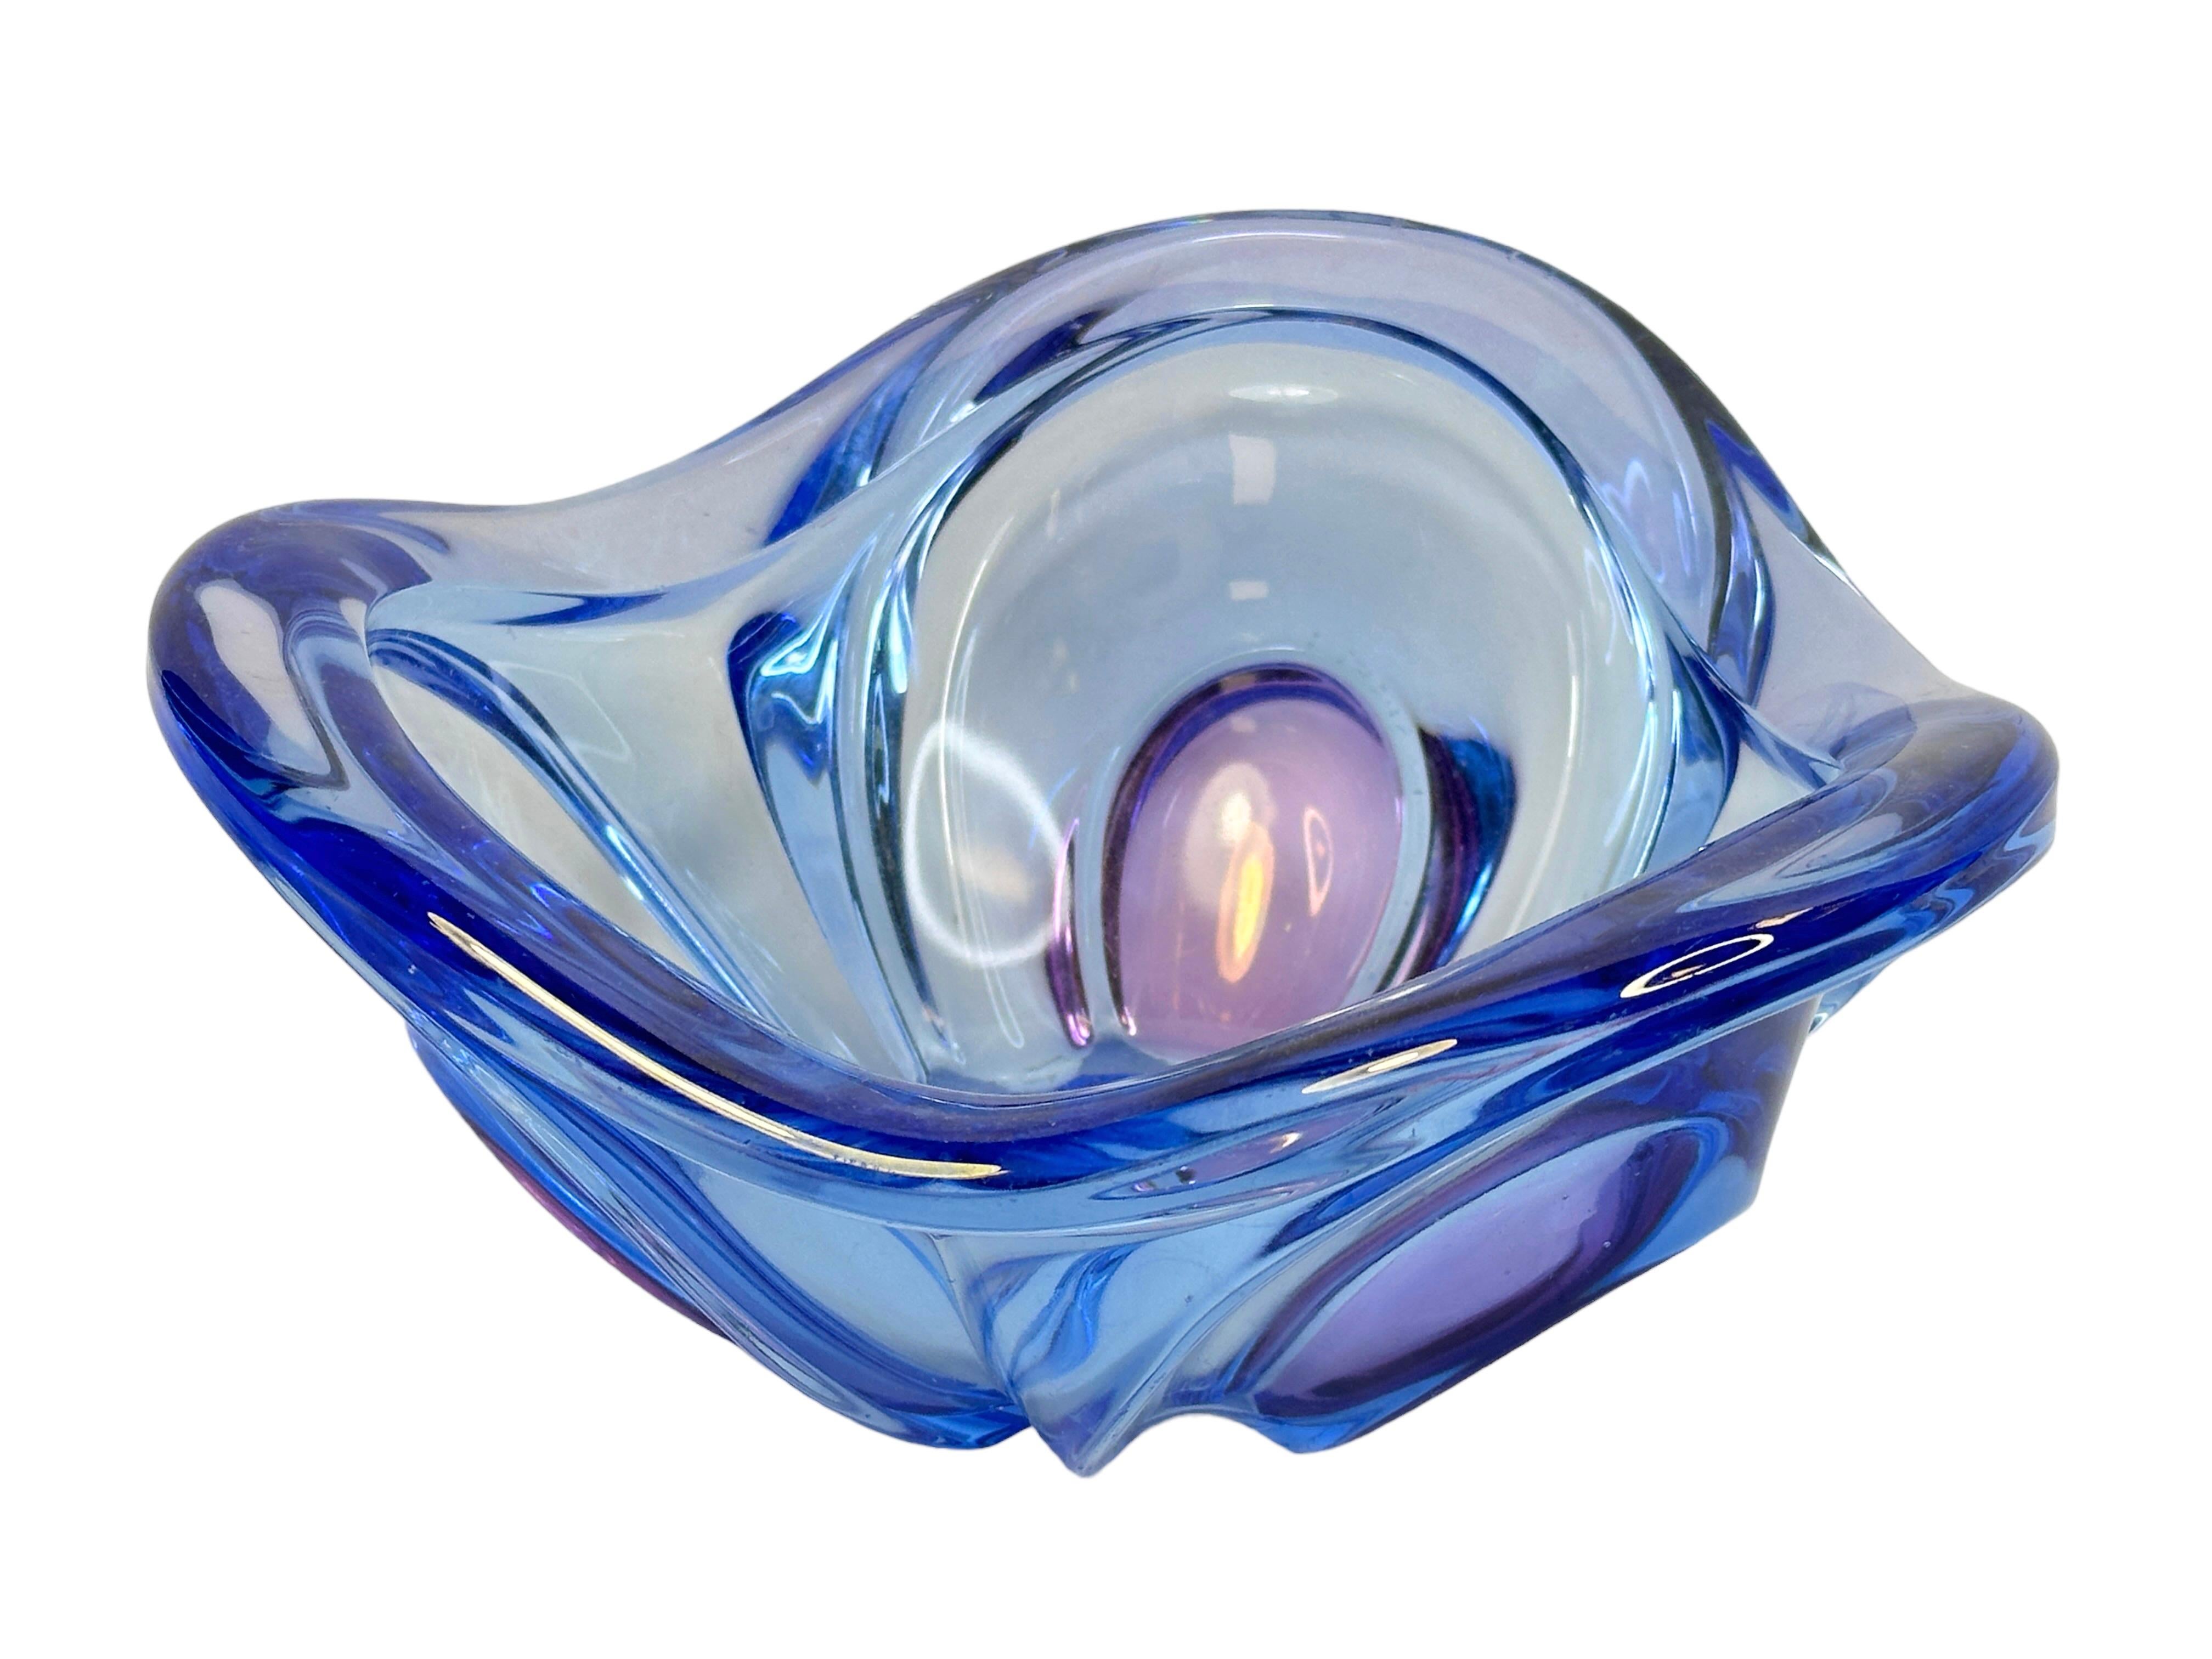 Late 20th Century Beautiful Blue & Purple Murano Glass Bowl Catchall Vintage, Italy, 1970s For Sale